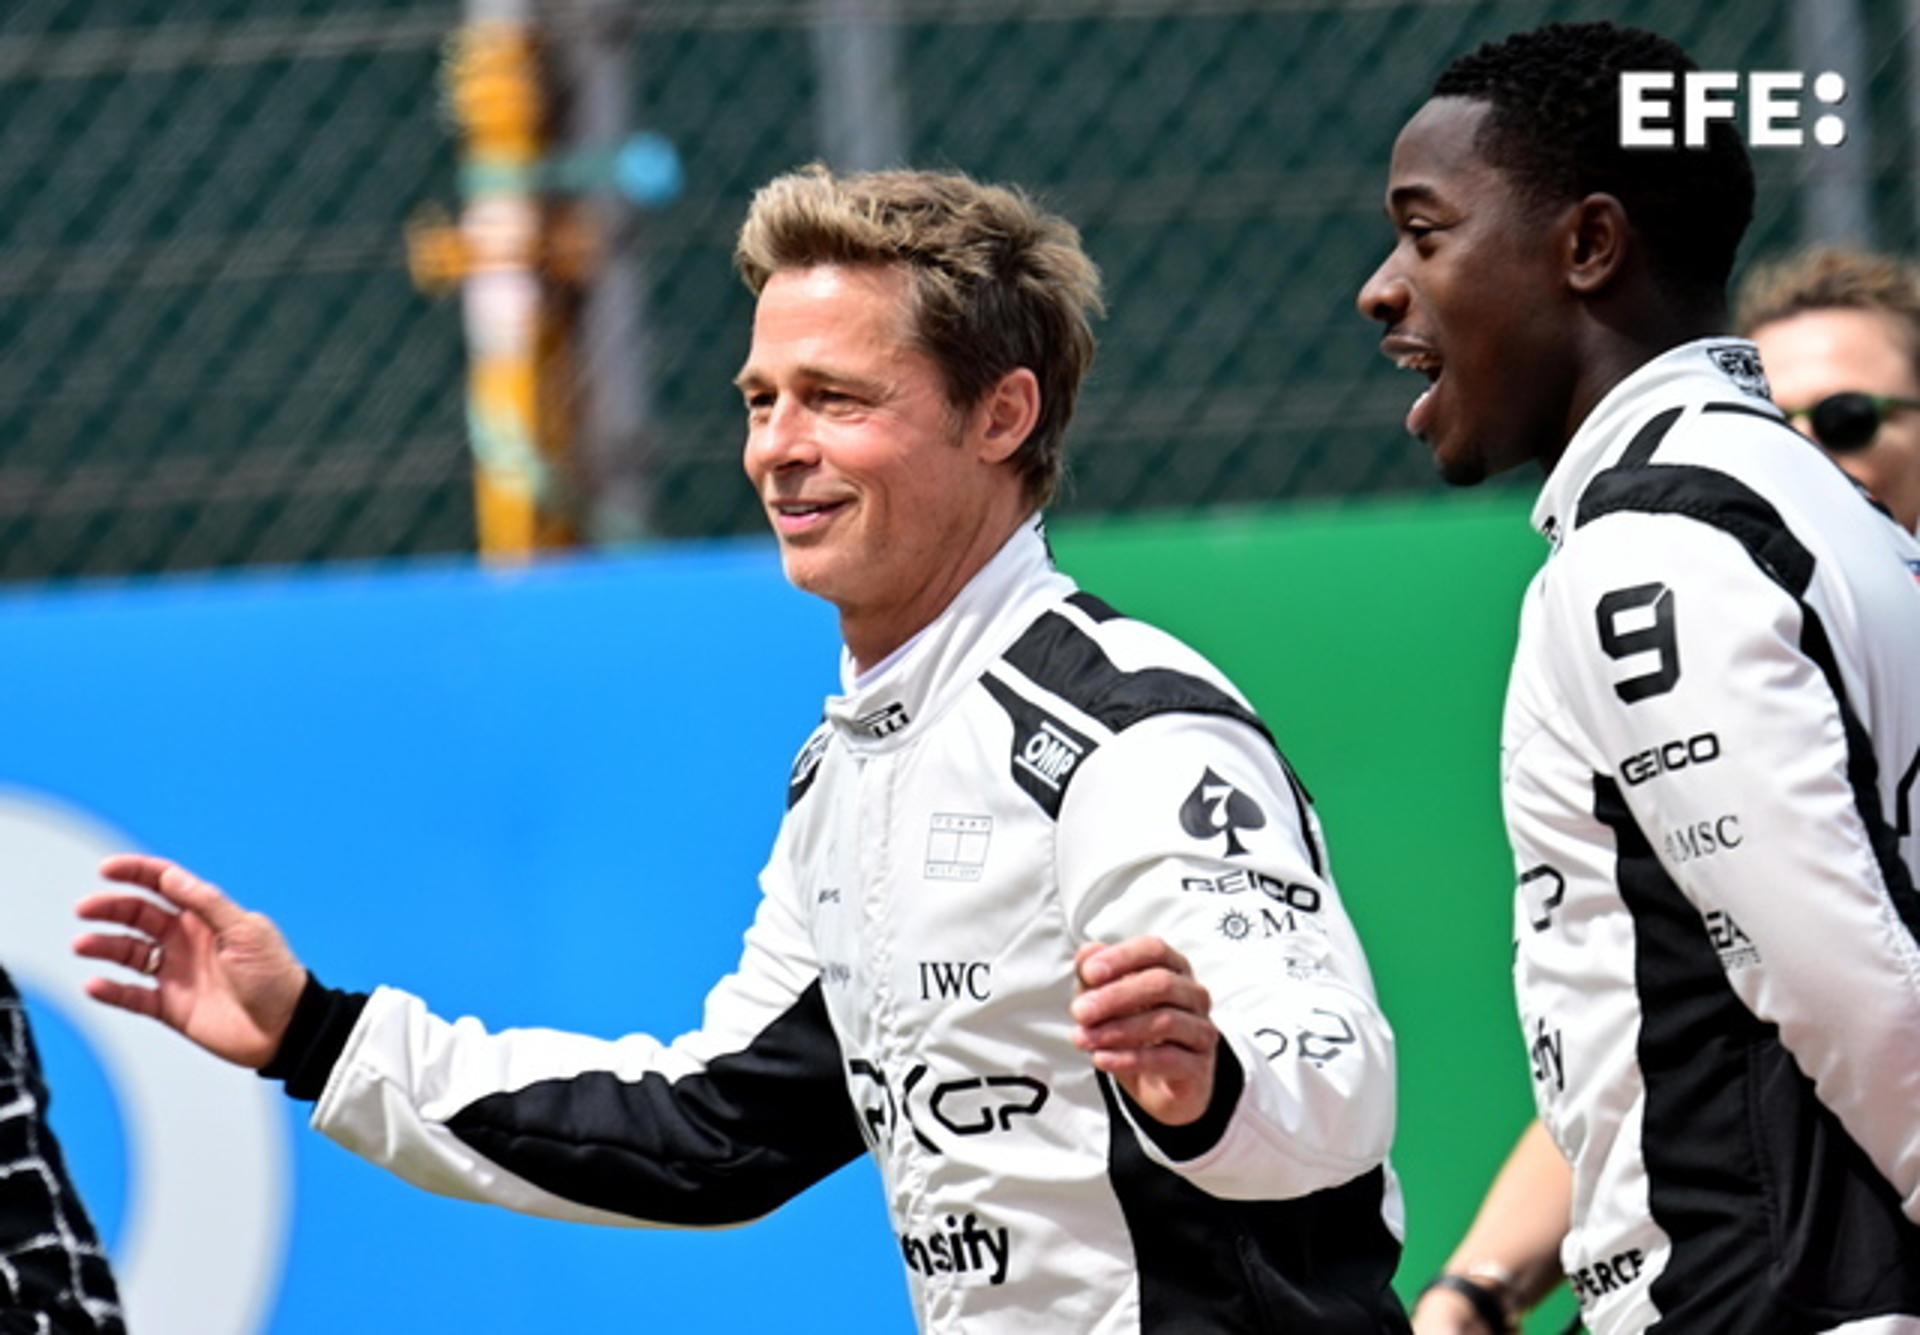 Actors Brad Pitt (L) and Damson Idris prior to the start of the Formula One British Grand Prix at the Silverstone Circuit in Silverstone, England, 9 July 2023. They were at the track to film scenes for a film about F1. EFE/EPA/CHRISTIAN BRUNA
